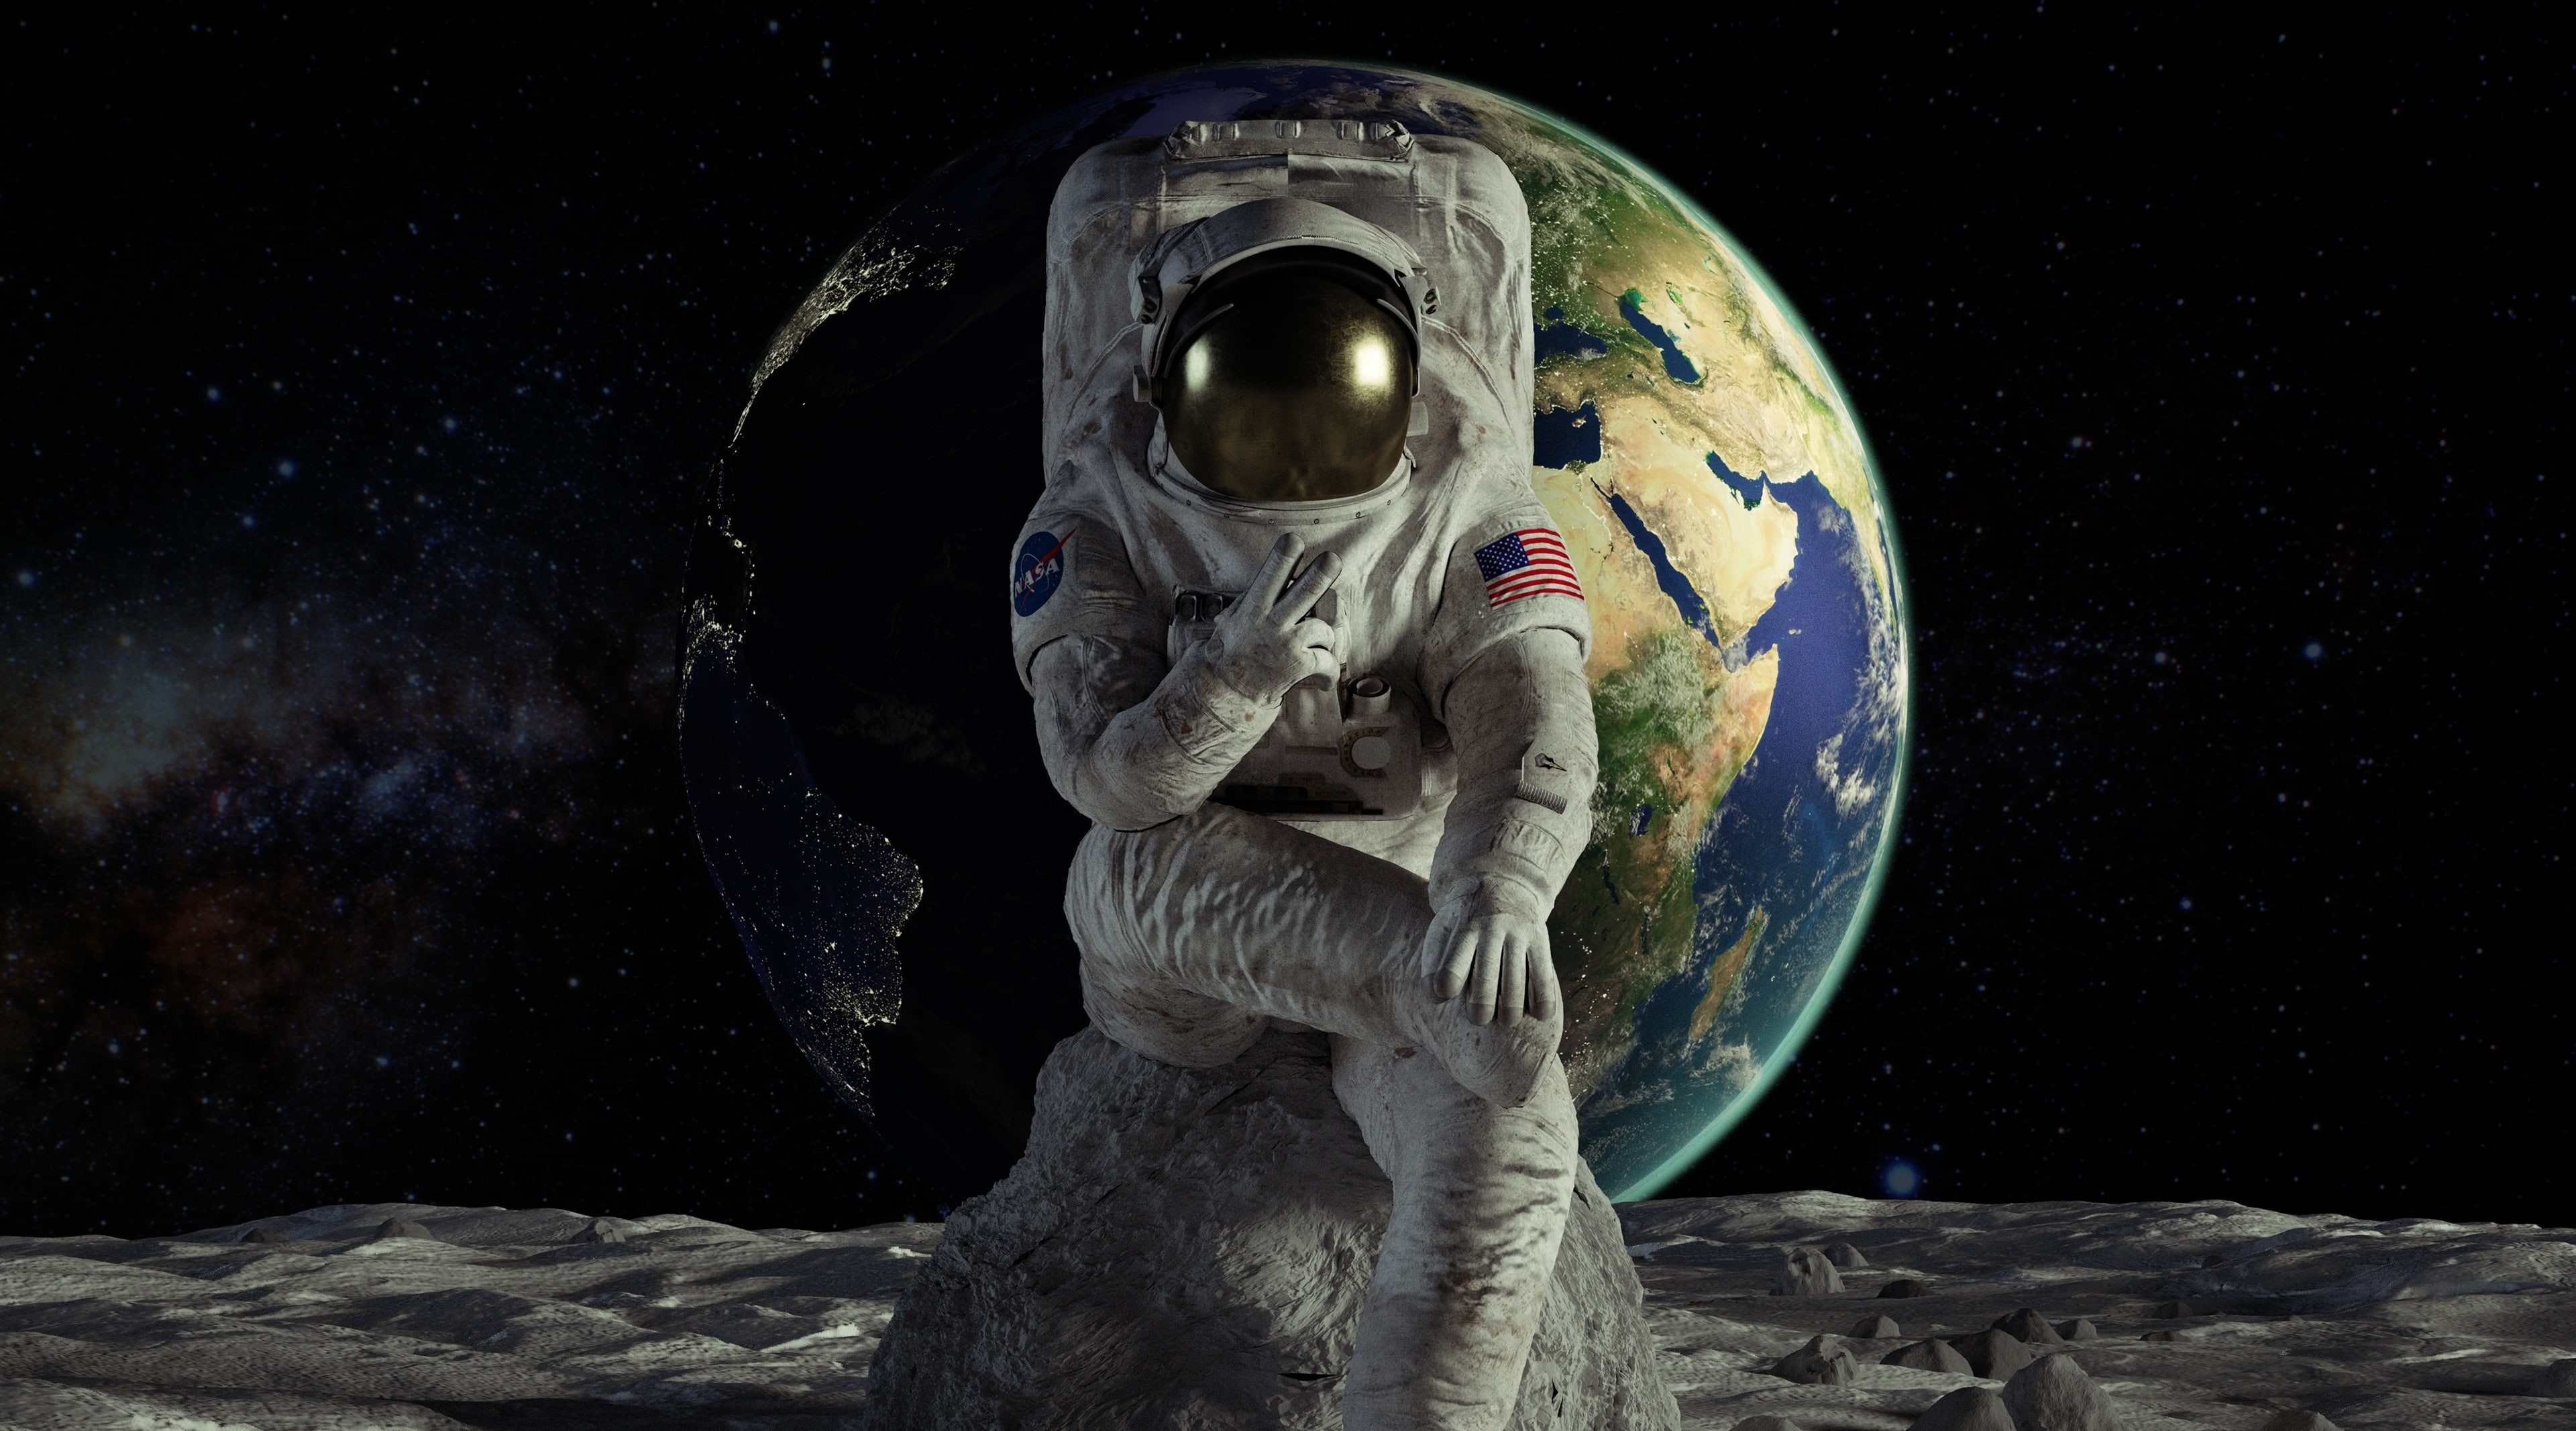 Wallpaper / Peace, Cinema4D, 4K, Space, 3Dmodeling, Cosmos, VSign, Astronaut, Earth, victory, Moon, Photo free download